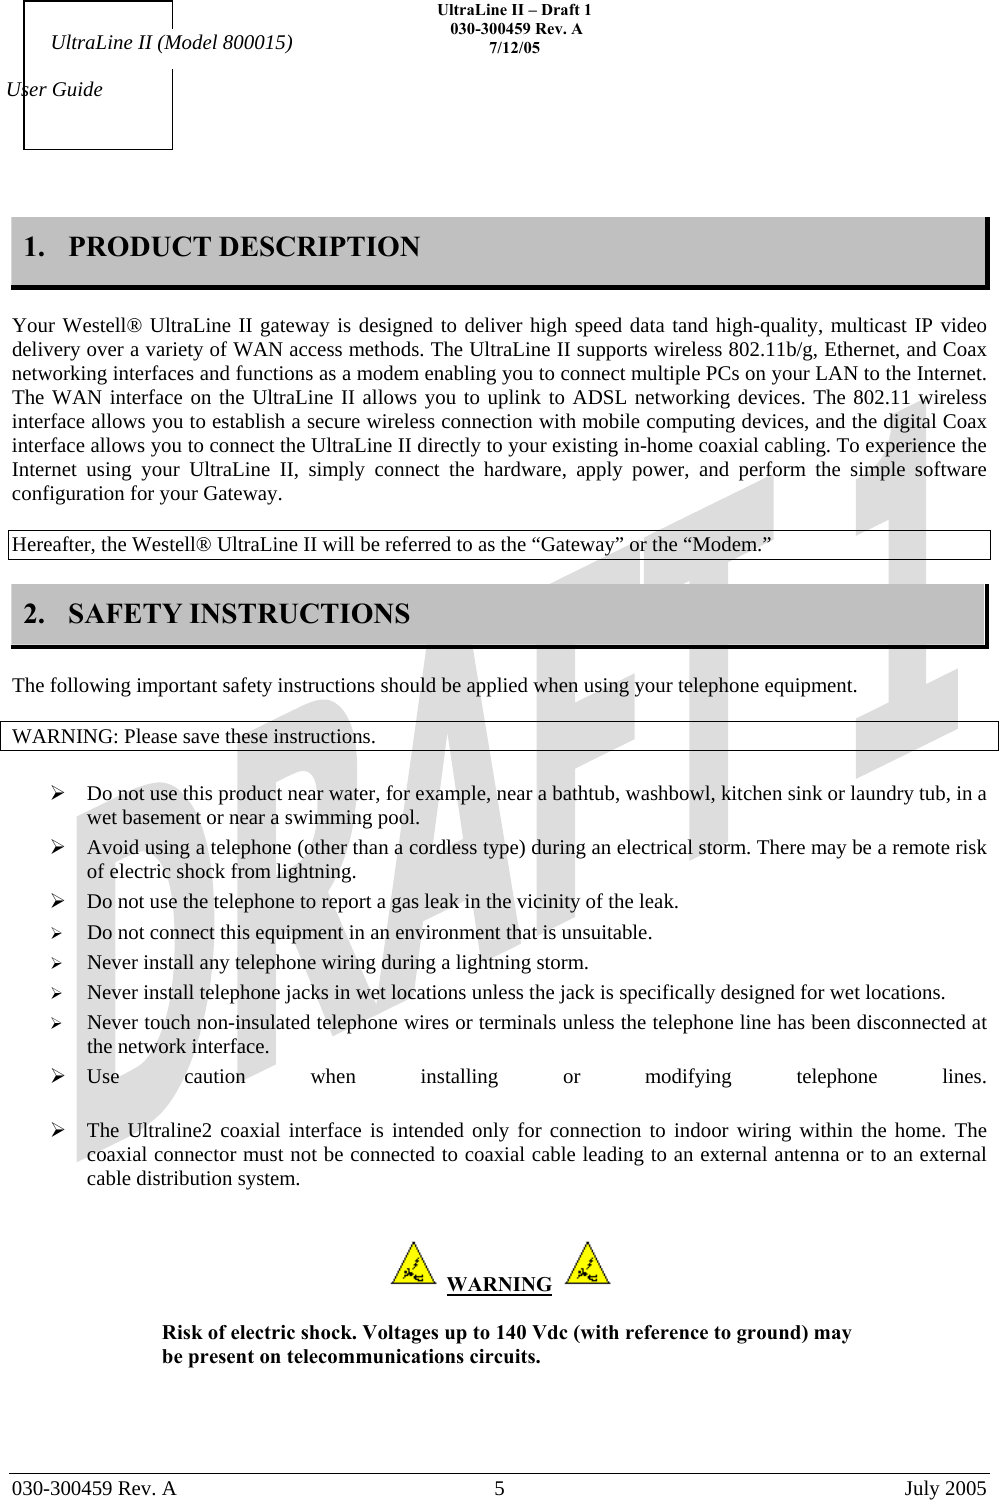    UltraLine II – Draft 1   030-300459 Rev. A 7/12/05     030-300459 Rev. A  5  July 2005    User Guide UltraLine II (Model 800015) 1. PRODUCT DESCRIPTION  Your Westell® UltraLine II gateway is designed to deliver high speed data tand high-quality, multicast IP video delivery over a variety of WAN access methods. The UltraLine II supports wireless 802.11b/g, Ethernet, and Coax networking interfaces and functions as a modem enabling you to connect multiple PCs on your LAN to the Internet. The WAN interface on the UltraLine II allows you to uplink to ADSL networking devices. The 802.11 wireless interface allows you to establish a secure wireless connection with mobile computing devices, and the digital Coax interface allows you to connect the UltraLine II directly to your existing in-home coaxial cabling. To experience the Internet using your UltraLine II, simply connect the hardware, apply power, and perform the simple software configuration for your Gateway.  Hereafter, the Westell® UltraLine II will be referred to as the “Gateway” or the “Modem.”  2. SAFETY INSTRUCTIONS  The following important safety instructions should be applied when using your telephone equipment.   WARNING: Please save these instructions.   Do not use this product near water, for example, near a bathtub, washbowl, kitchen sink or laundry tub, in a wet basement or near a swimming pool.  Avoid using a telephone (other than a cordless type) during an electrical storm. There may be a remote risk of electric shock from lightning.  Do not use the telephone to report a gas leak in the vicinity of the leak.   Do not connect this equipment in an environment that is unsuitable.   Never install any telephone wiring during a lightning storm.   Never install telephone jacks in wet locations unless the jack is specifically designed for wet locations.   Never touch non-insulated telephone wires or terminals unless the telephone line has been disconnected at the network interface.  Use caution when installing or modifying telephone lines.   The Ultraline2 coaxial interface is intended only for connection to indoor wiring within the home. The coaxial connector must not be connected to coaxial cable leading to an external antenna or to an external cable distribution system.    WARNING    Risk of electric shock. Voltages up to 140 Vdc (with reference to ground) may be present on telecommunications circuits.    